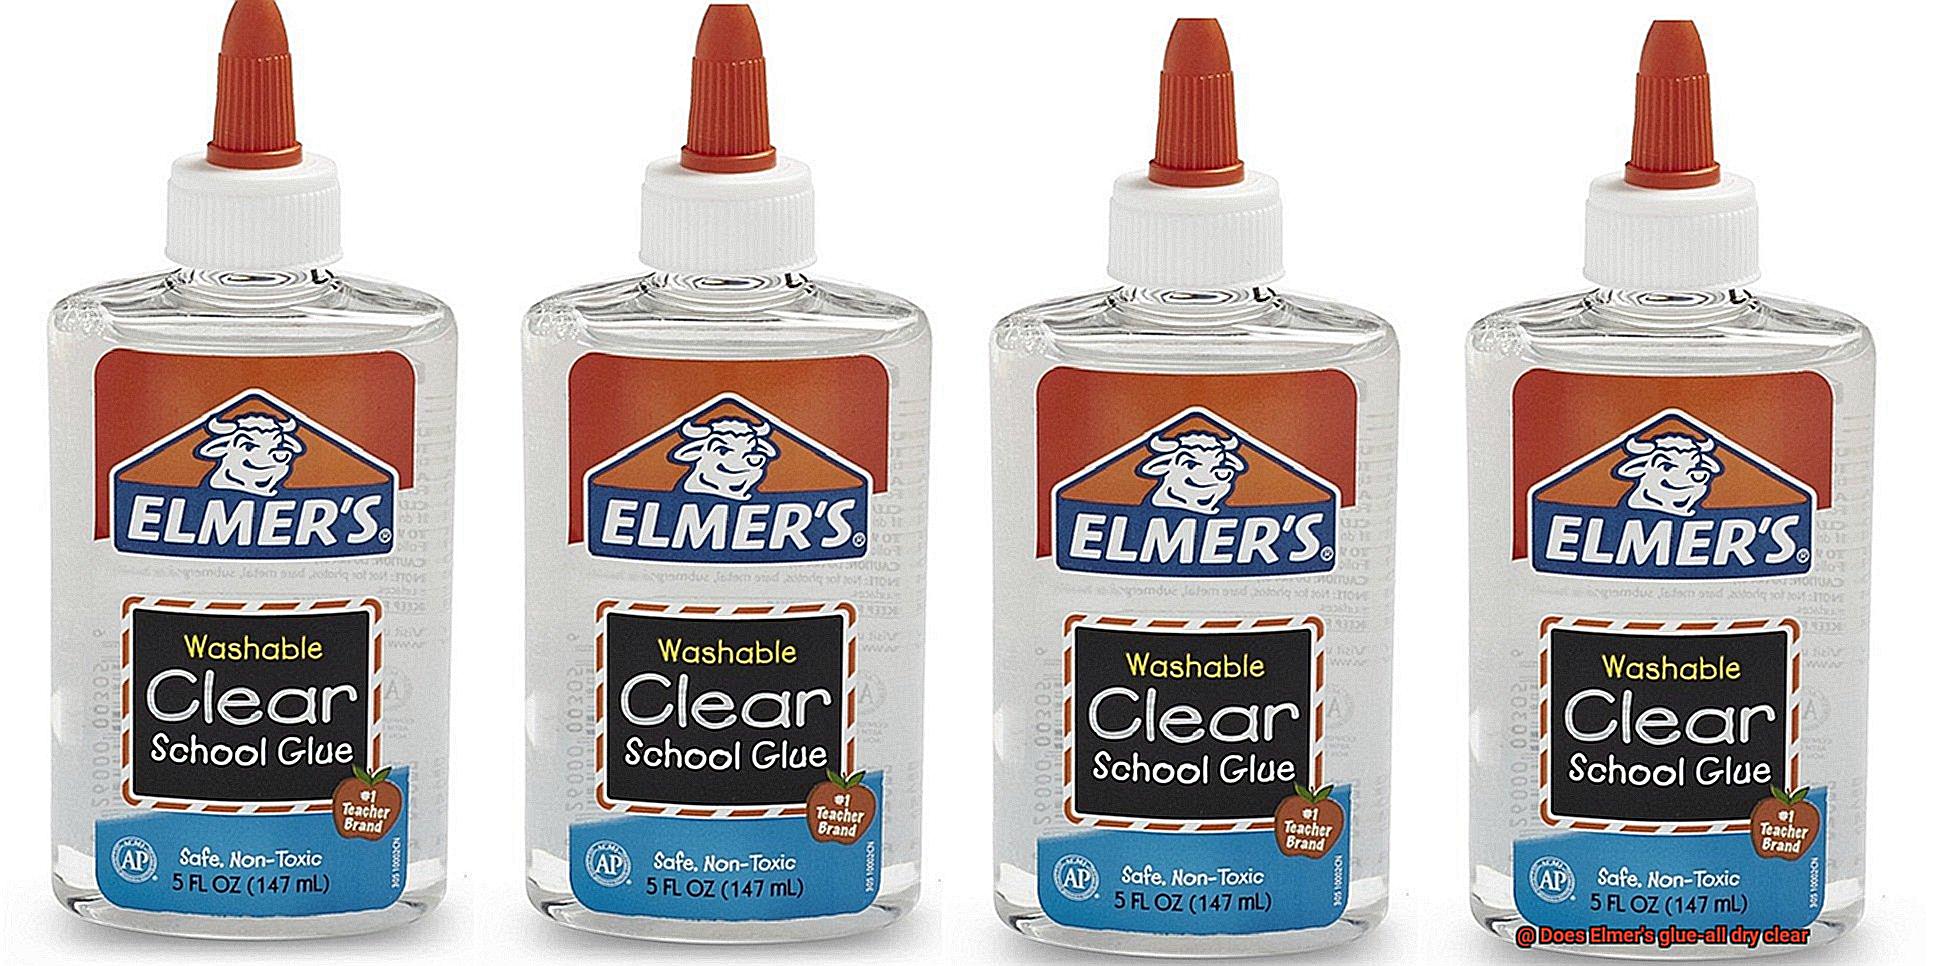 Does Elmer's glue-all dry clear-7